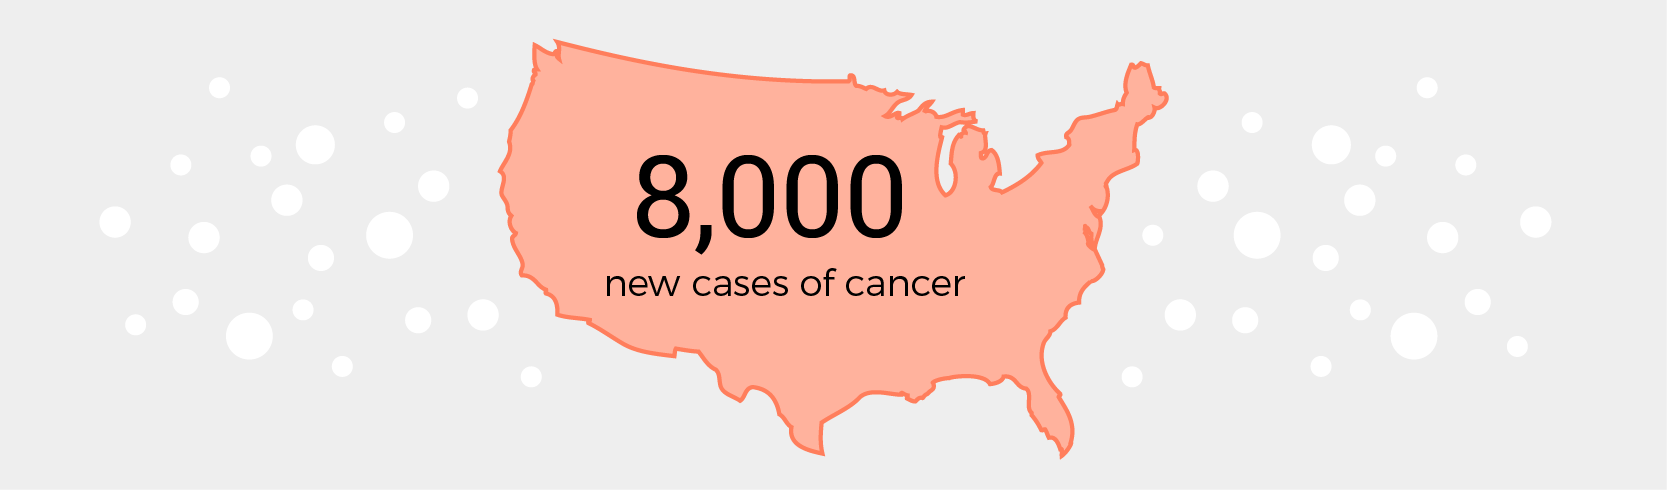 8000 new cases of cancer